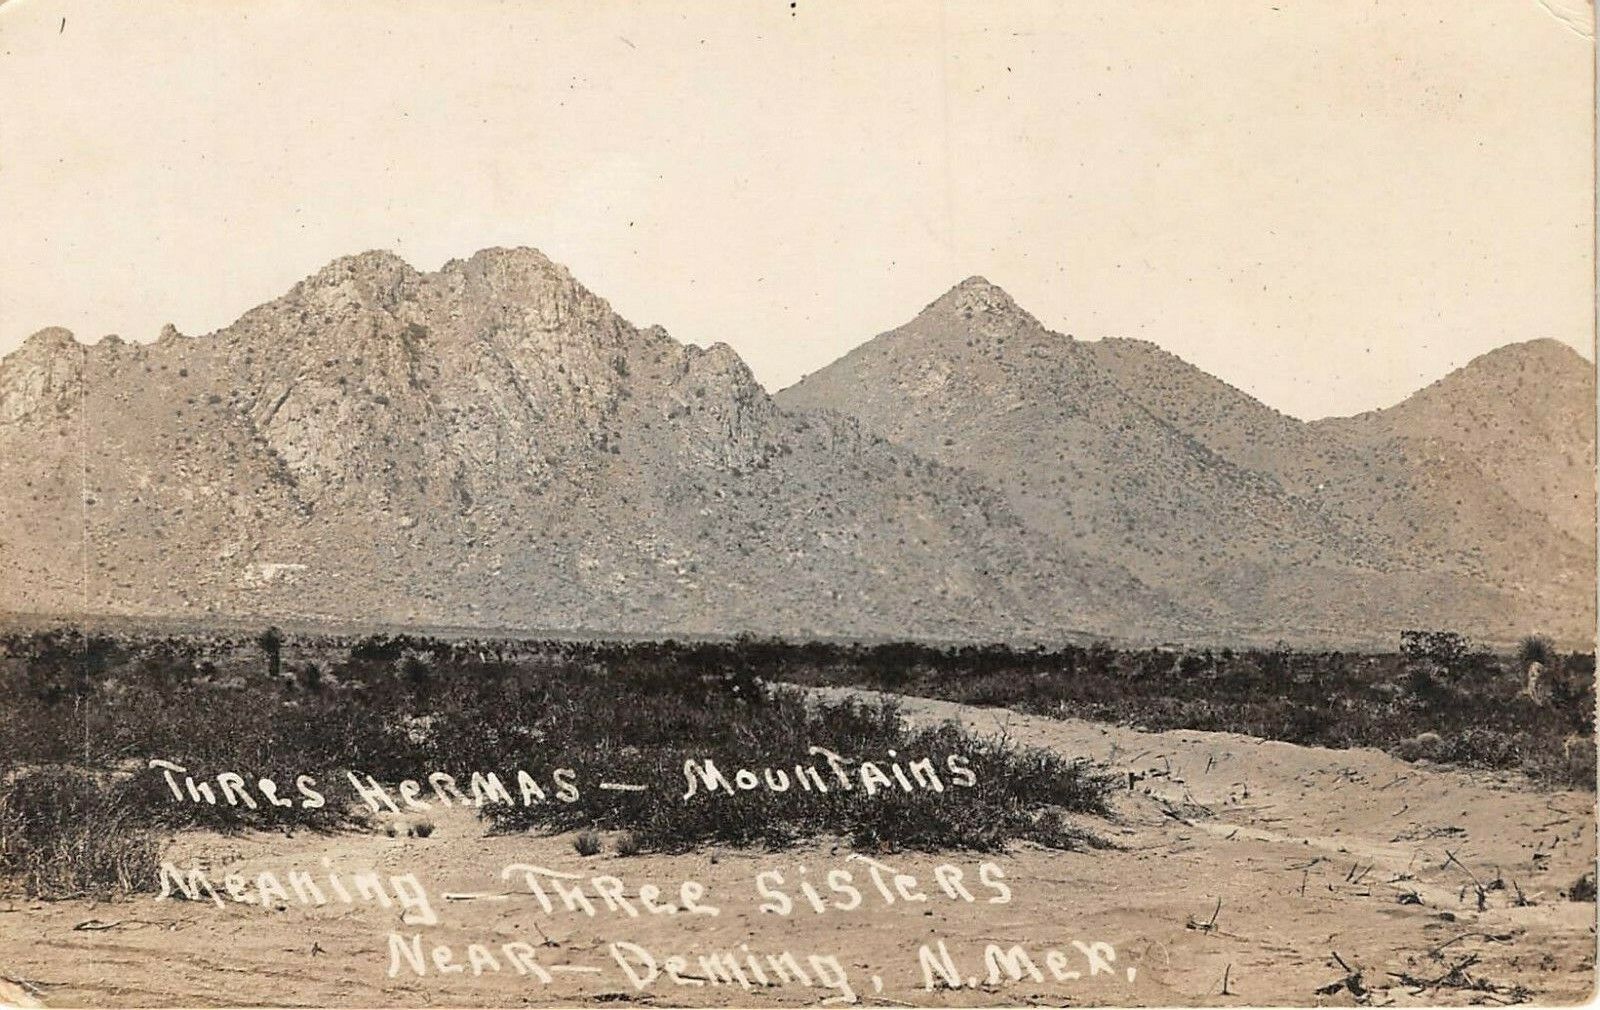 Deming New Mexico NM Tres Hermanas Mountains Three Sisters Real Photo Postcard